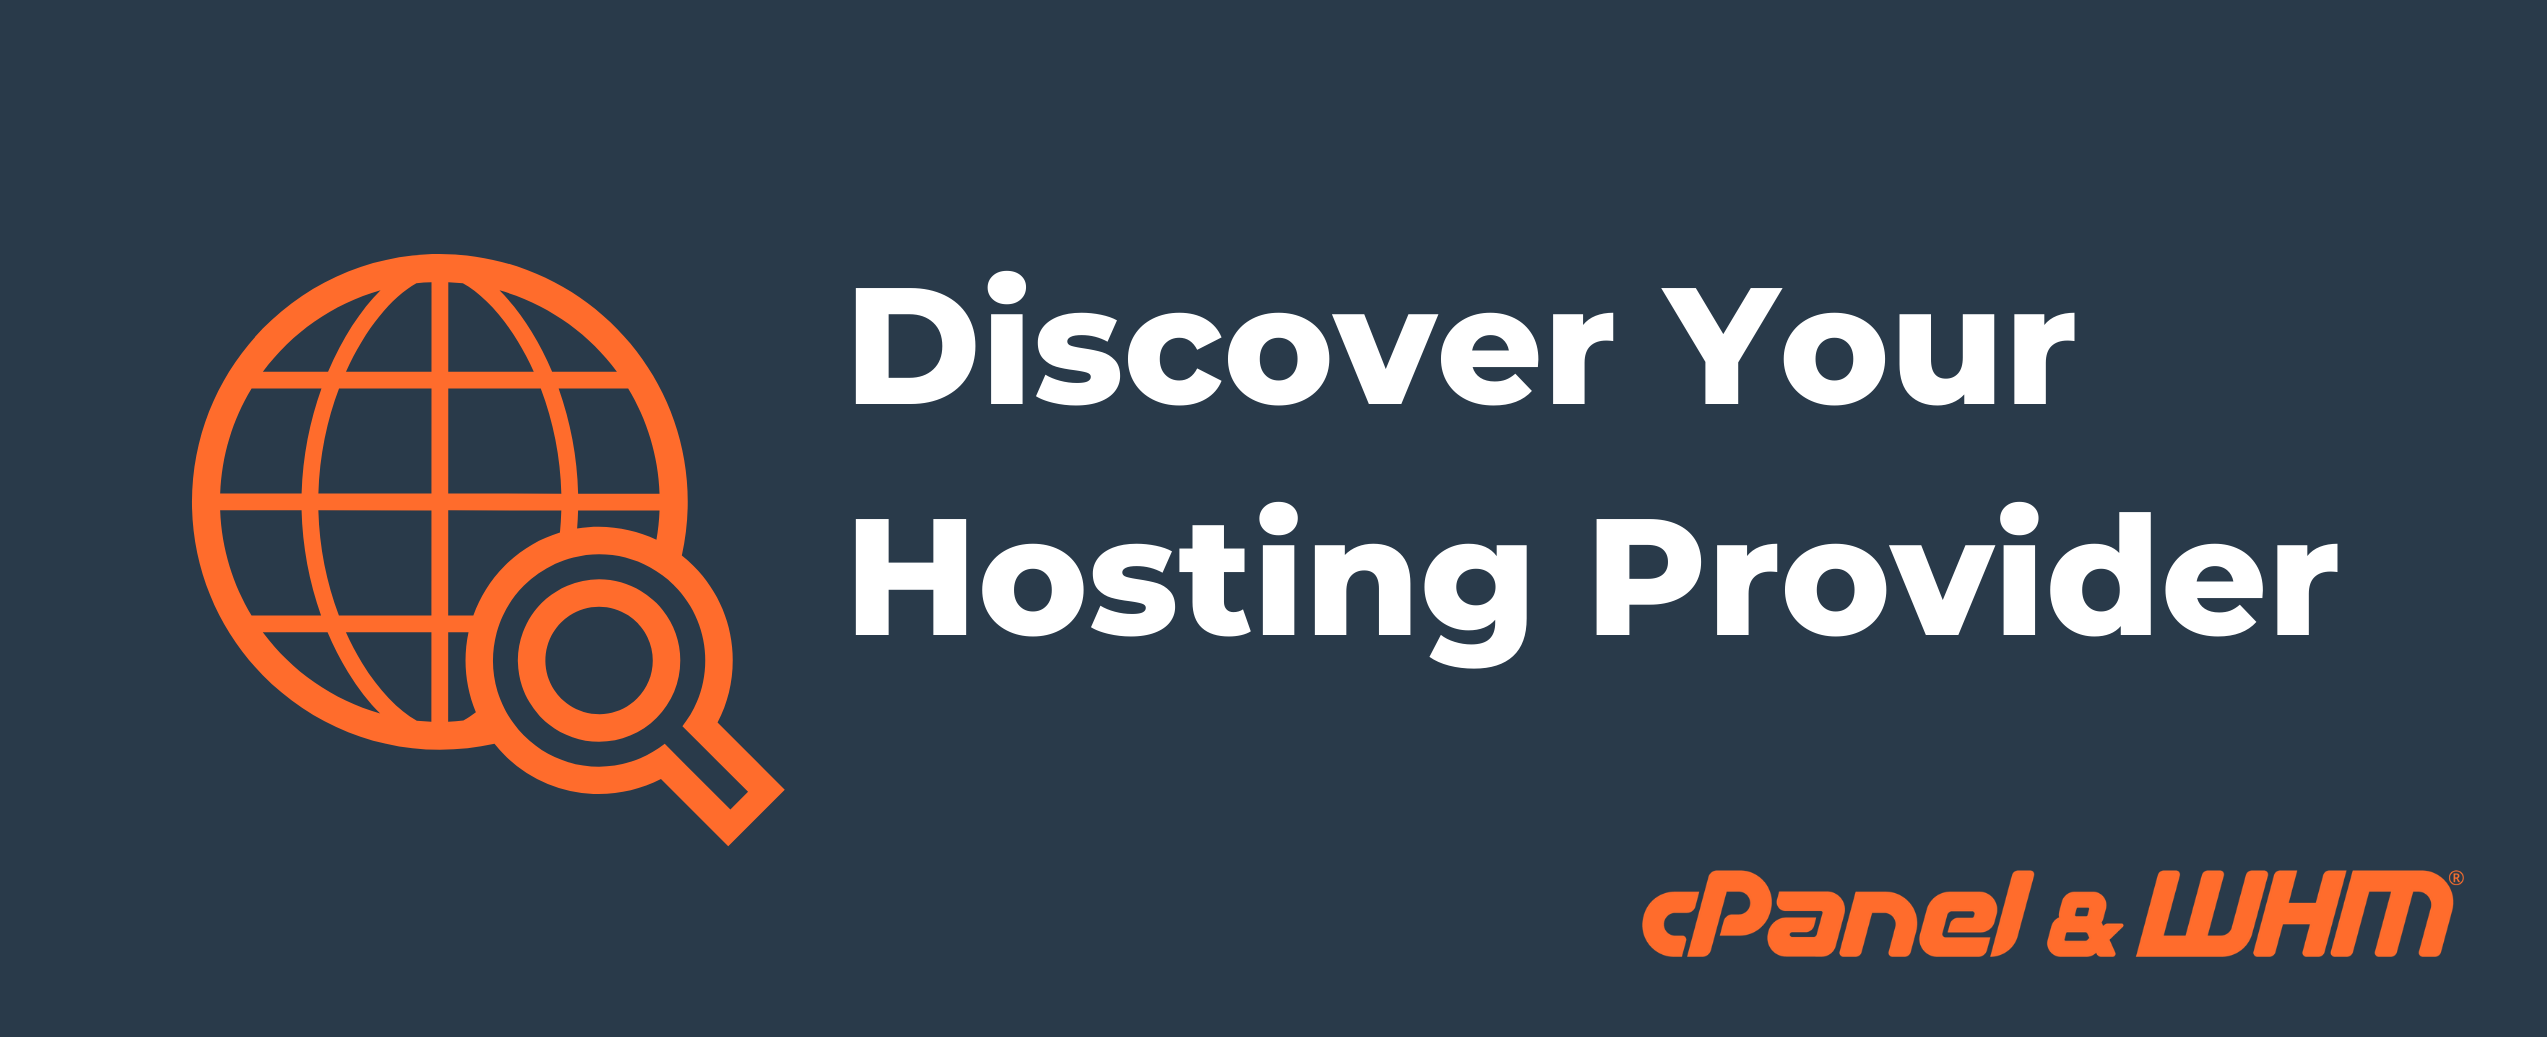 Discover Your Hosting Provider | cPanel Blog